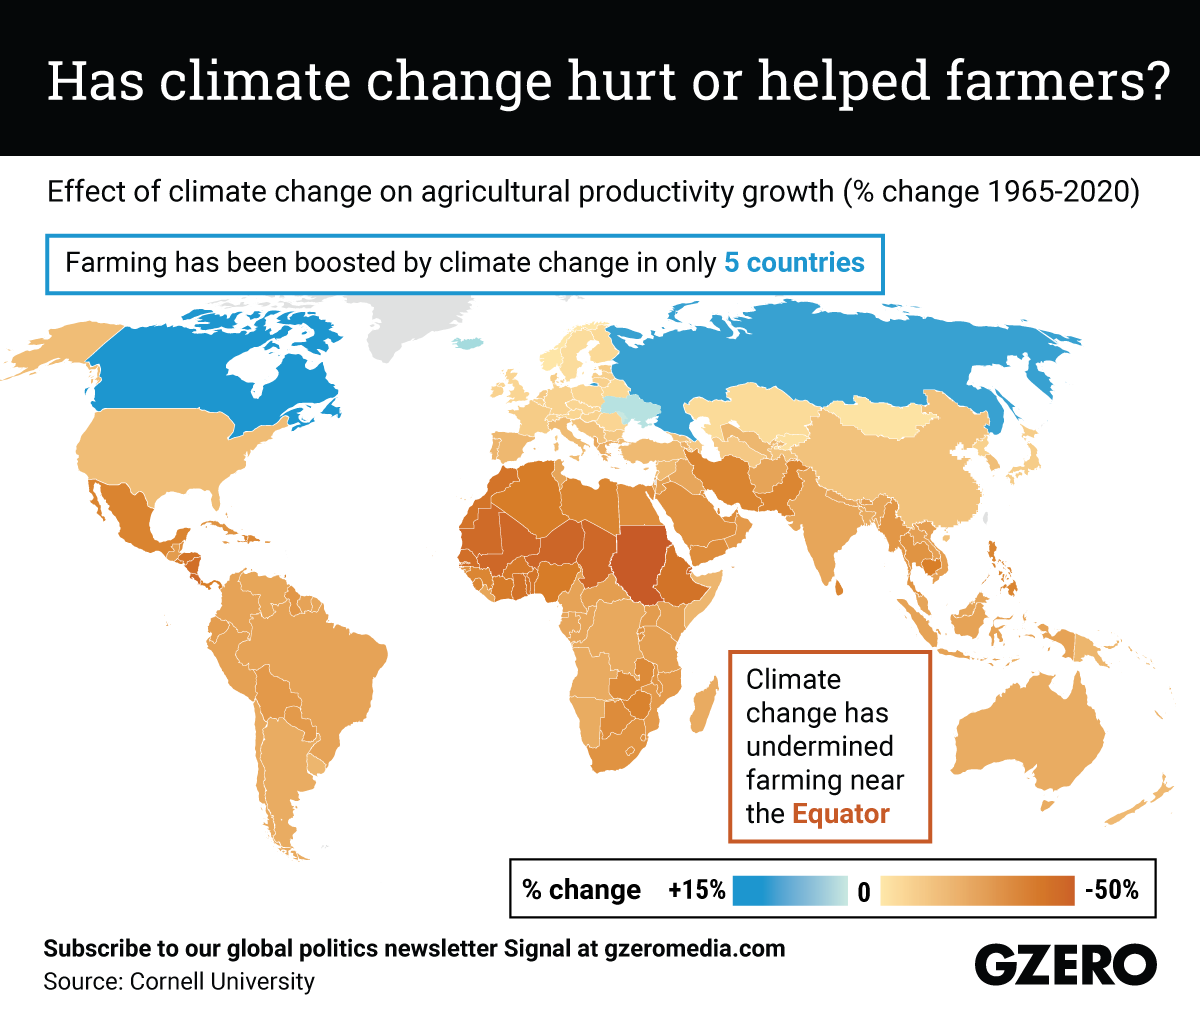 The Graphic Truth: Has climate change hurt or helped farmers?